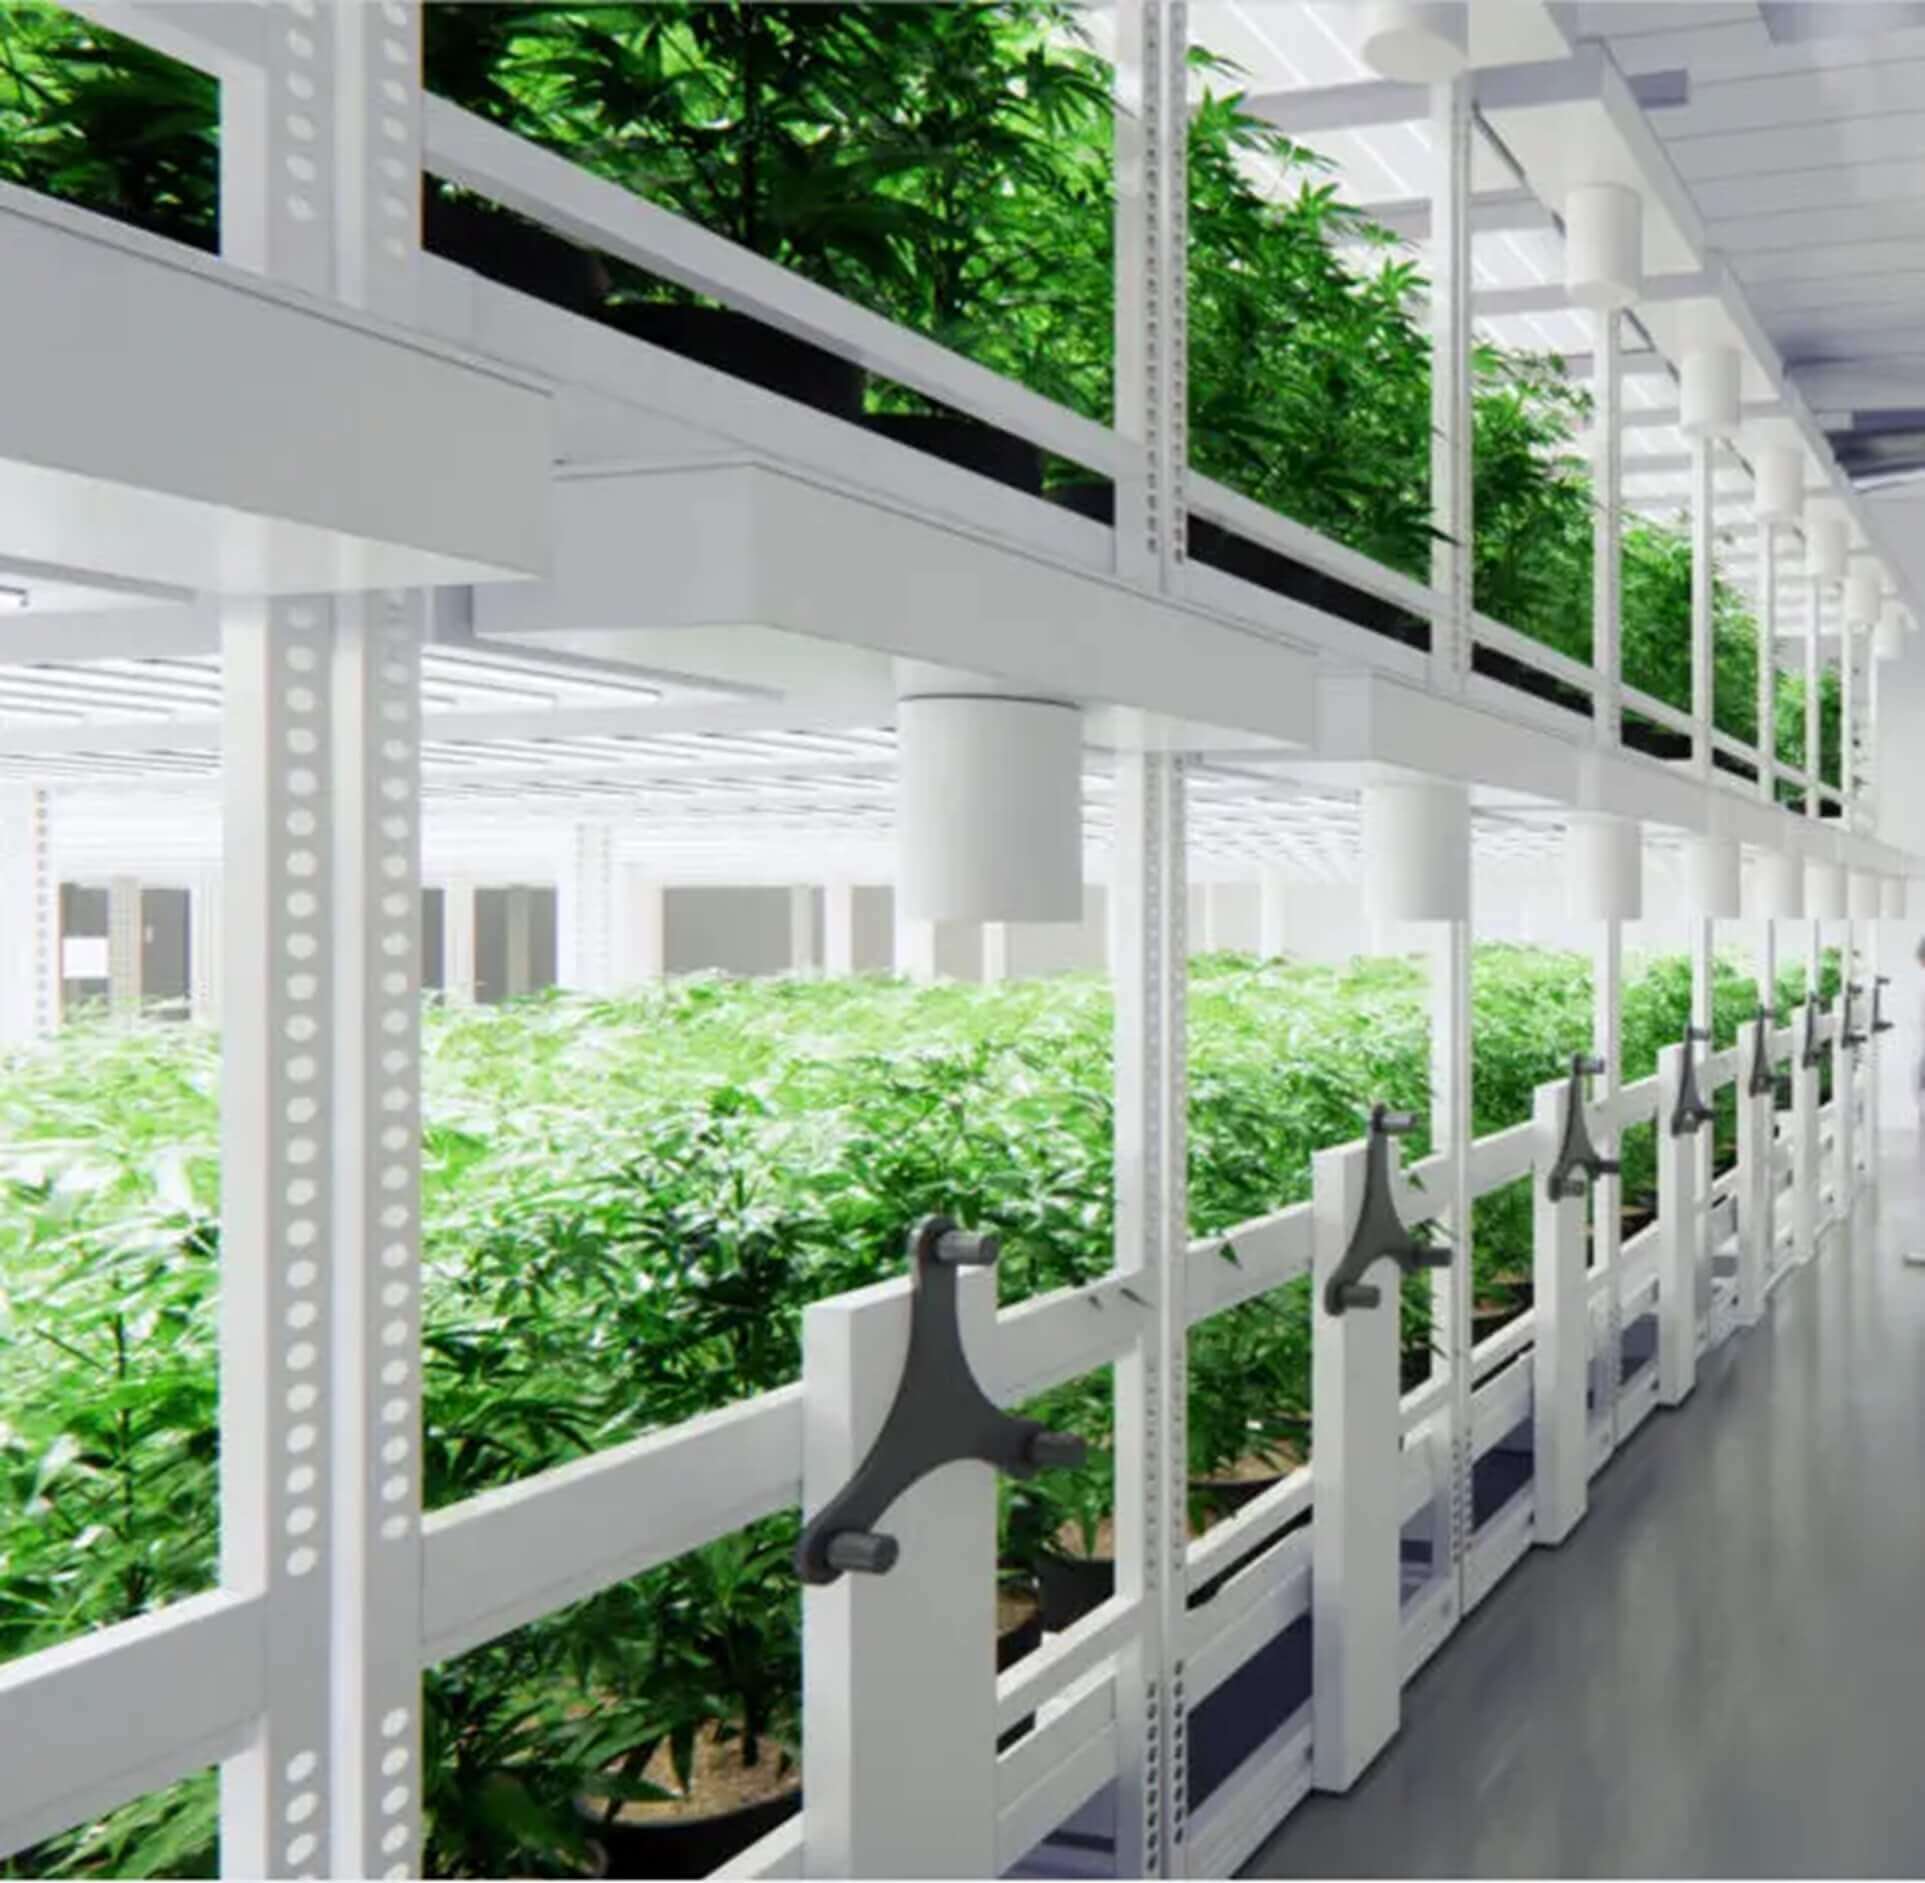  Can Commercial Vertical Grow Racks Be Customized To Accommodate Specific Plant Growth Requirements?